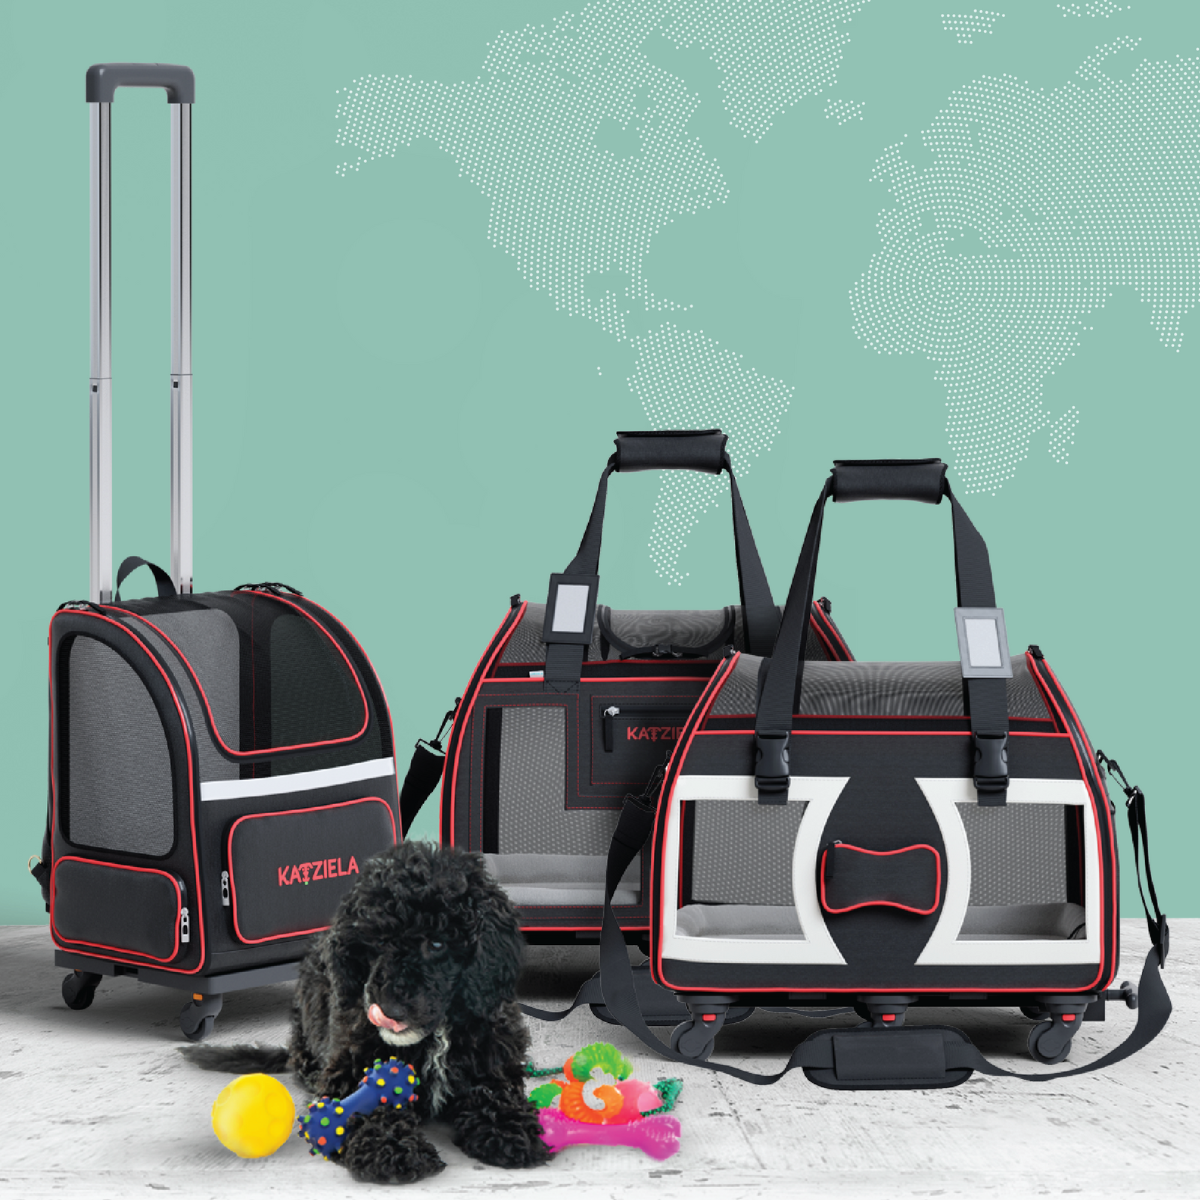 Katziela Rolling Pet Carrier Airline Approved - Pet Carrier with